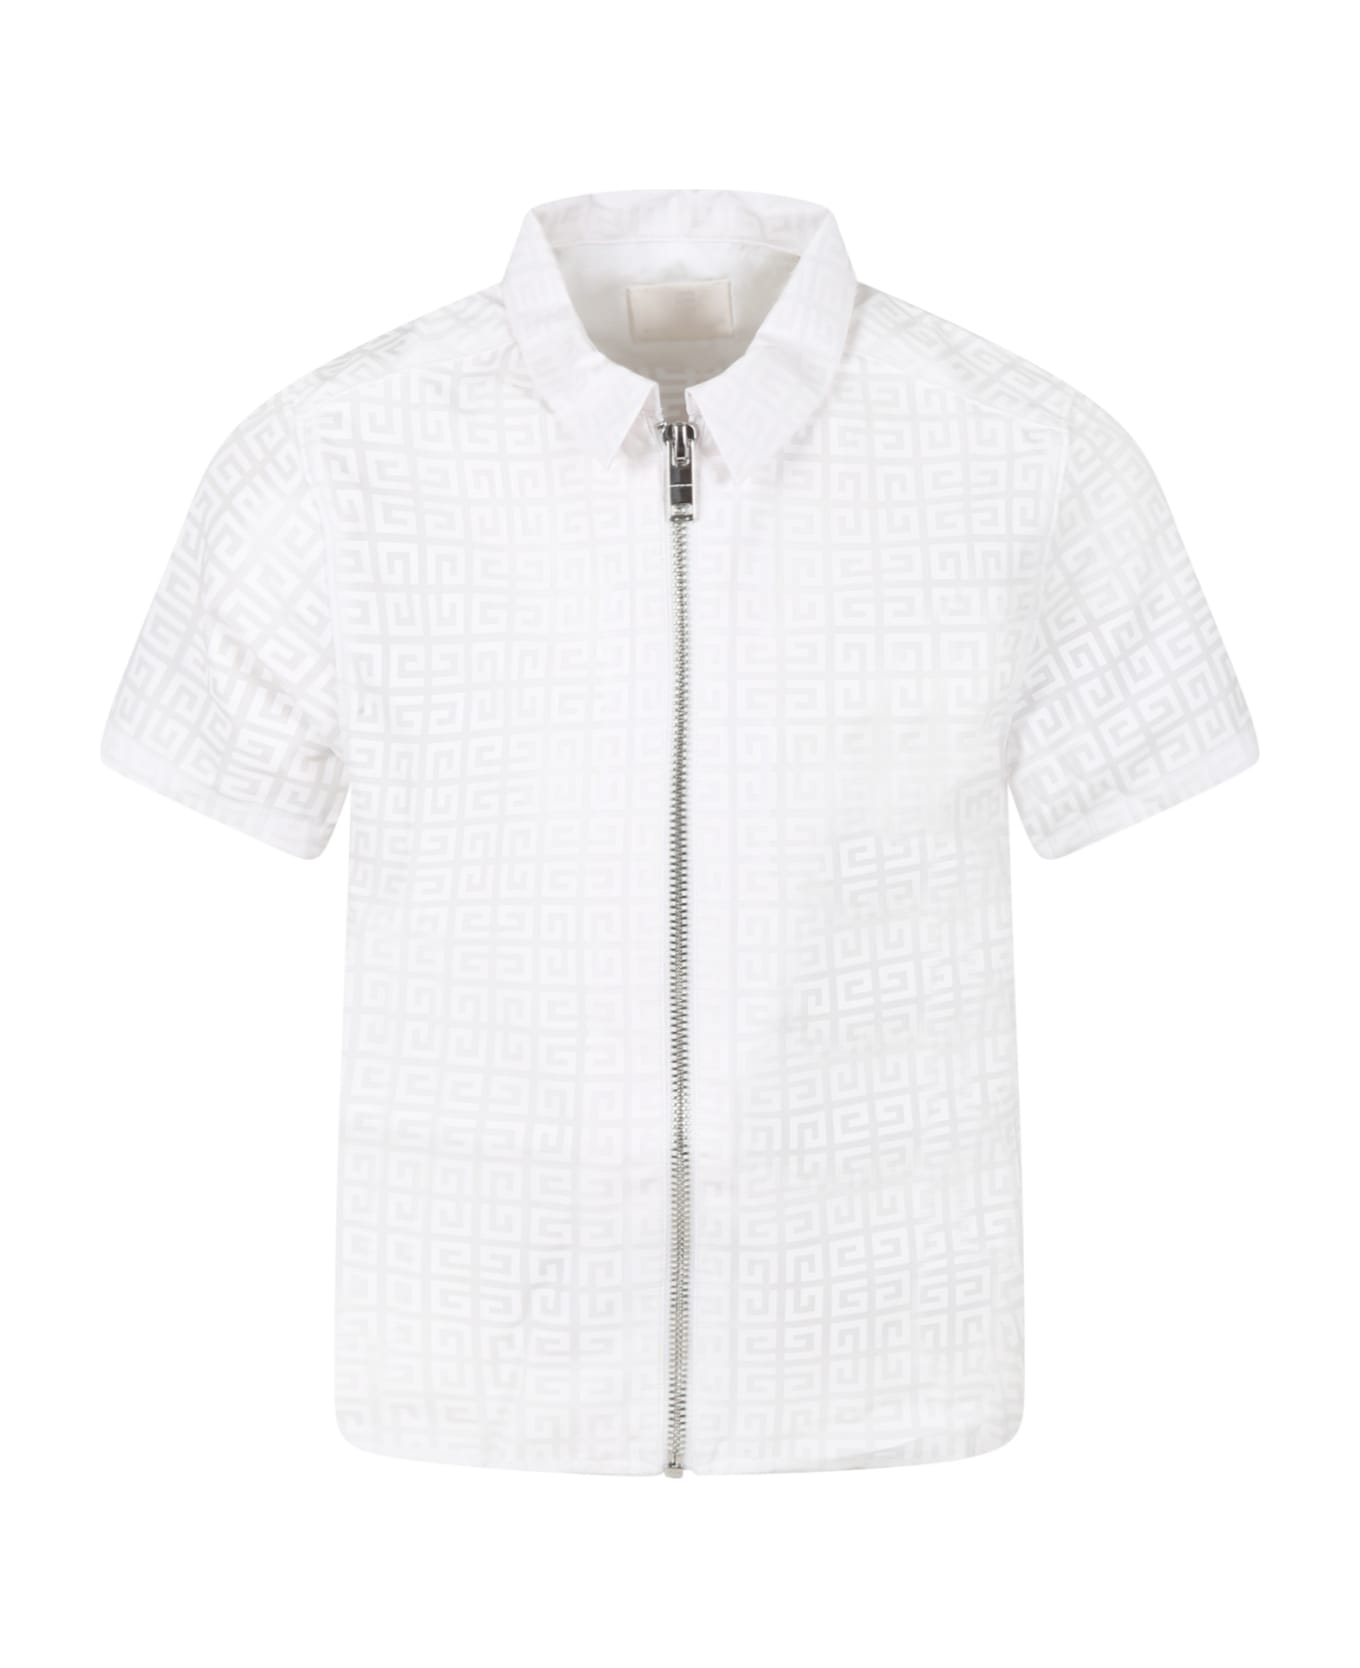 Givenchy White Shirt For Kids With Logos - White